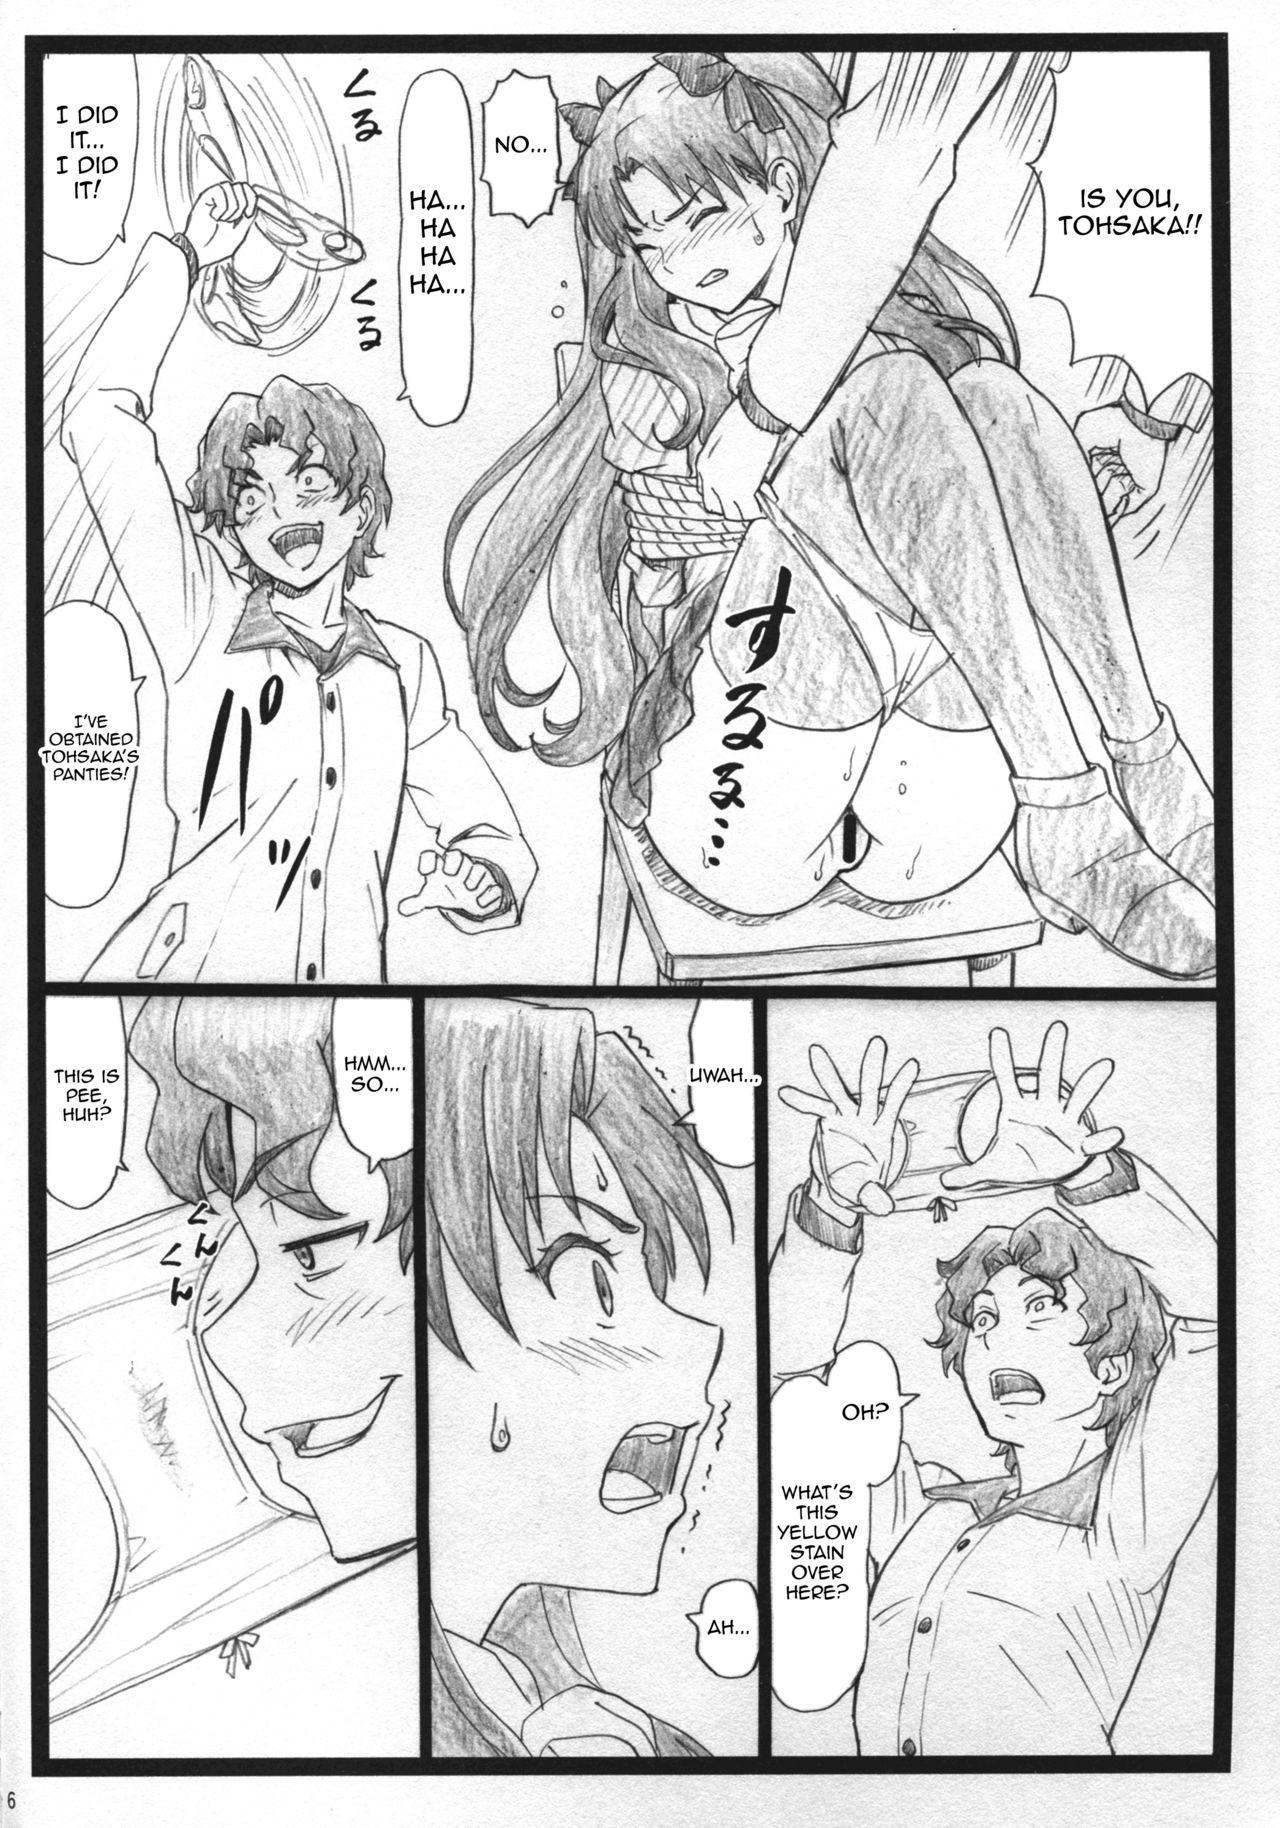 Asshole Rin to Shite... | With Rin... - Fate stay night Euro Porn - Page 6